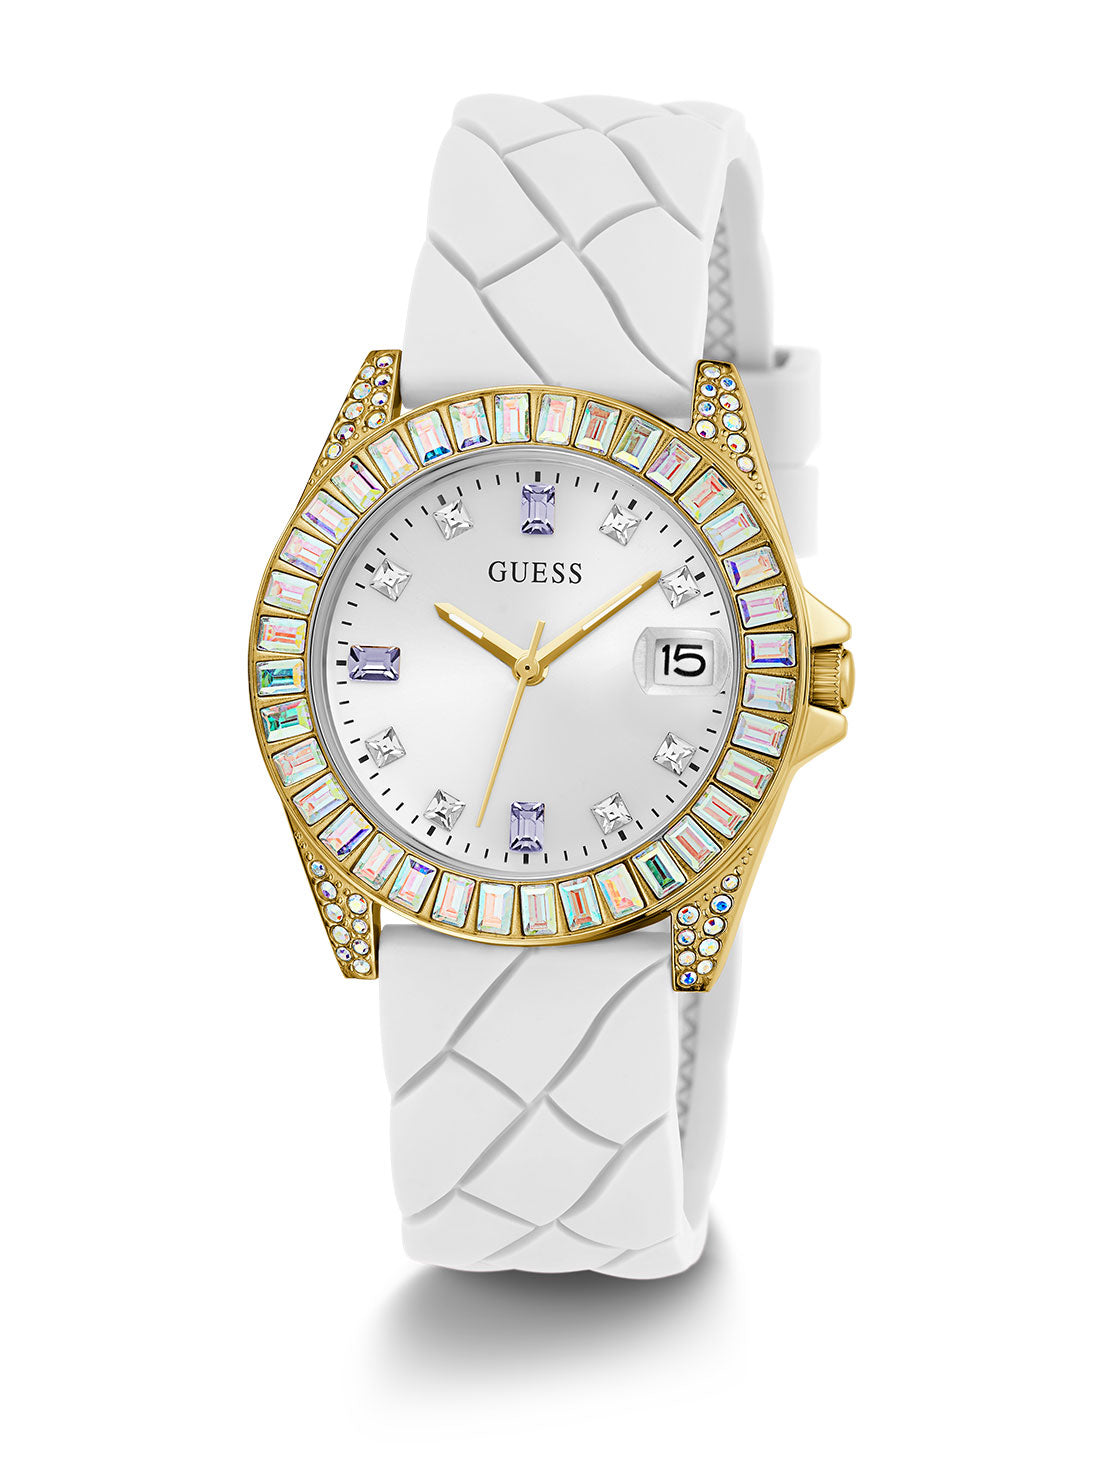 GUESS Women's White Opaline Crystal Silicone Watch GW0585L2 Full View